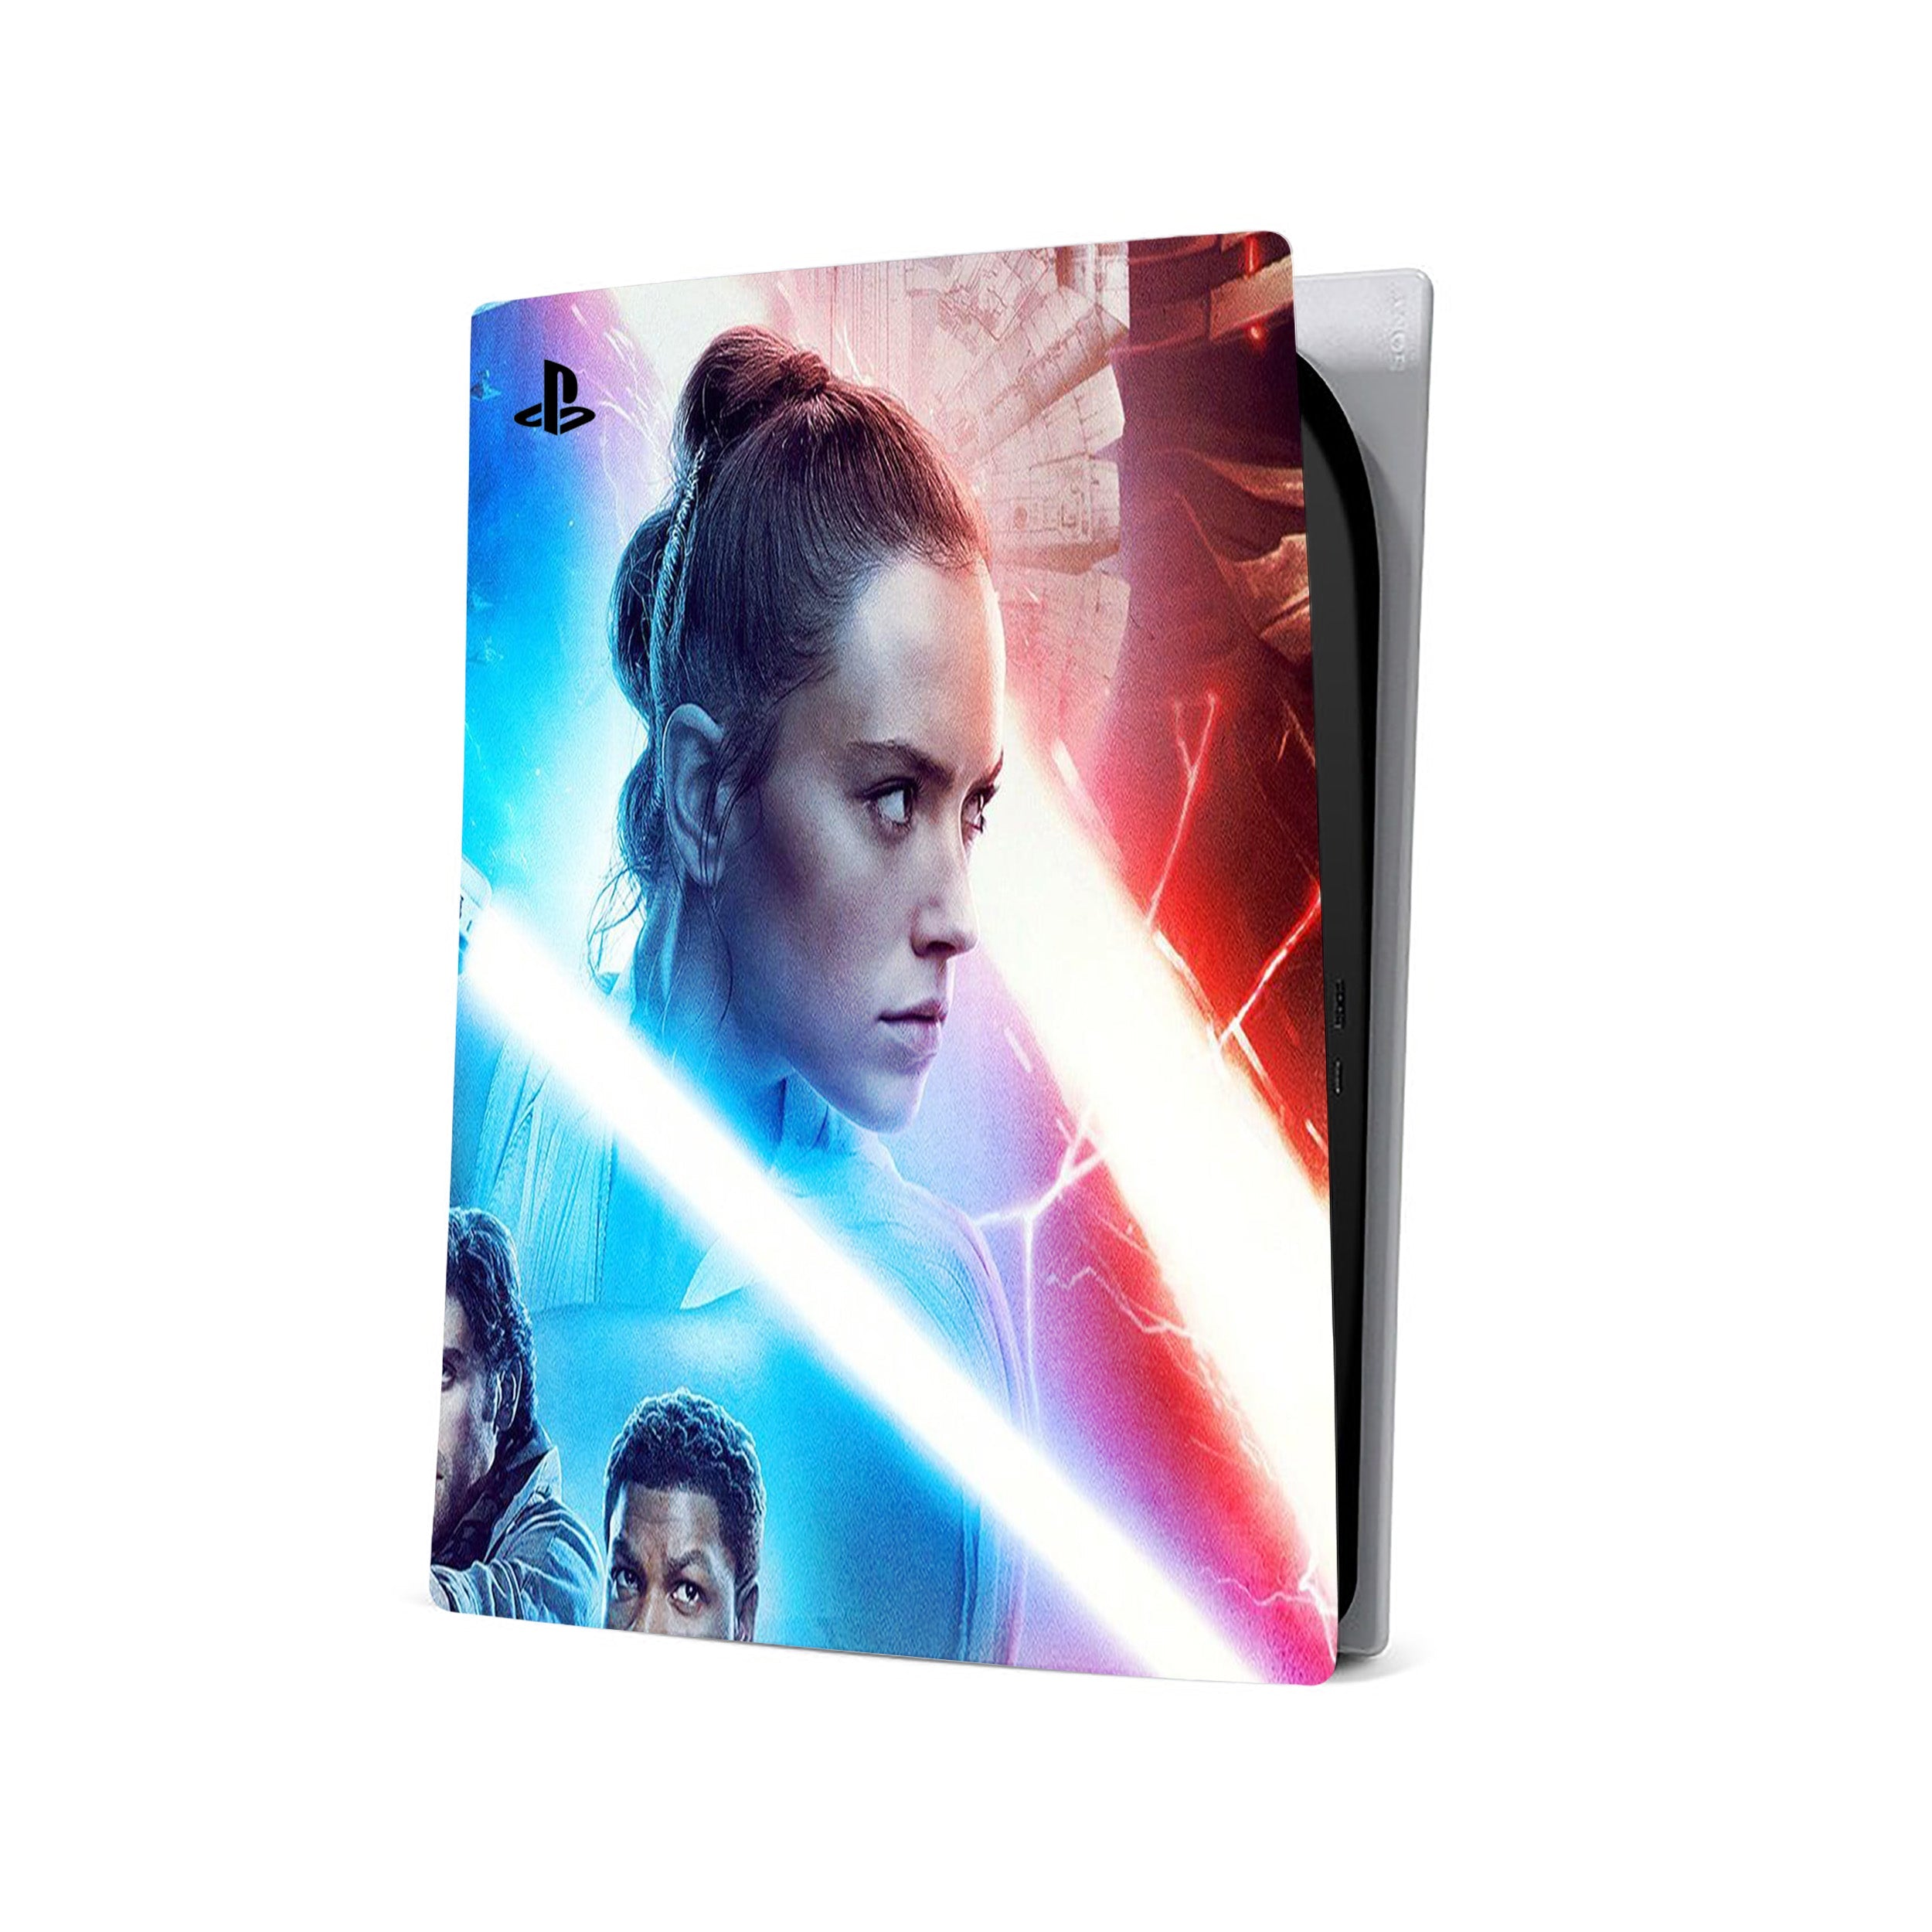 A video game skin featuring a Star Wars The Rise of Skywalker design for the PS5.